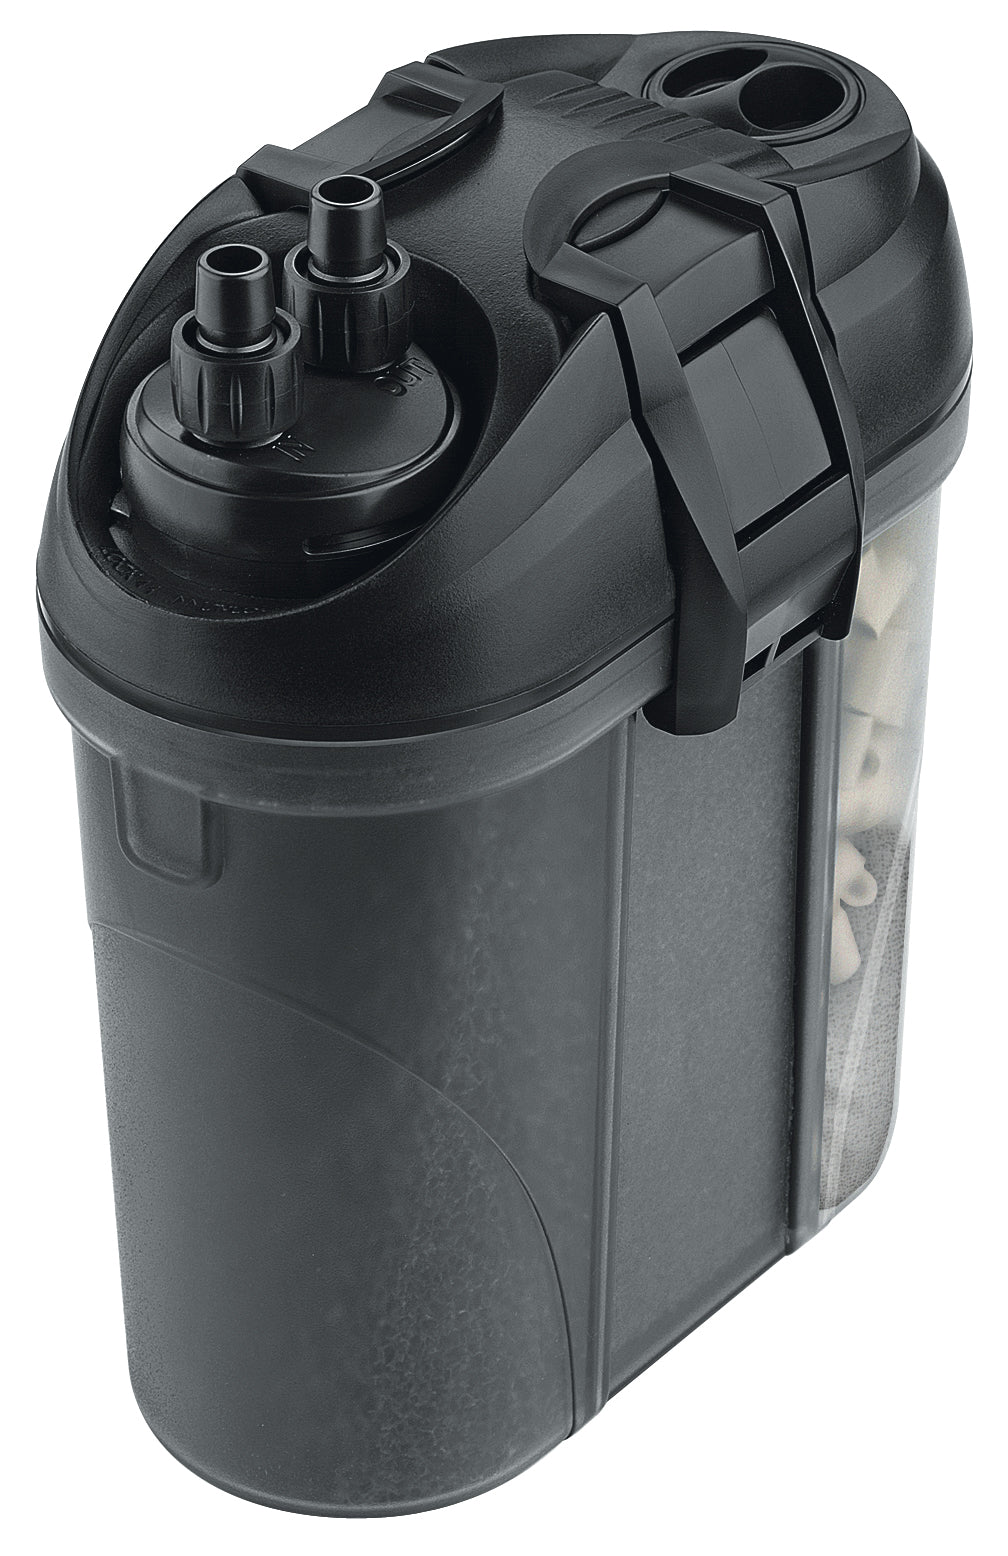 Zoo Med Turtle Clean 30 External Canister Filter